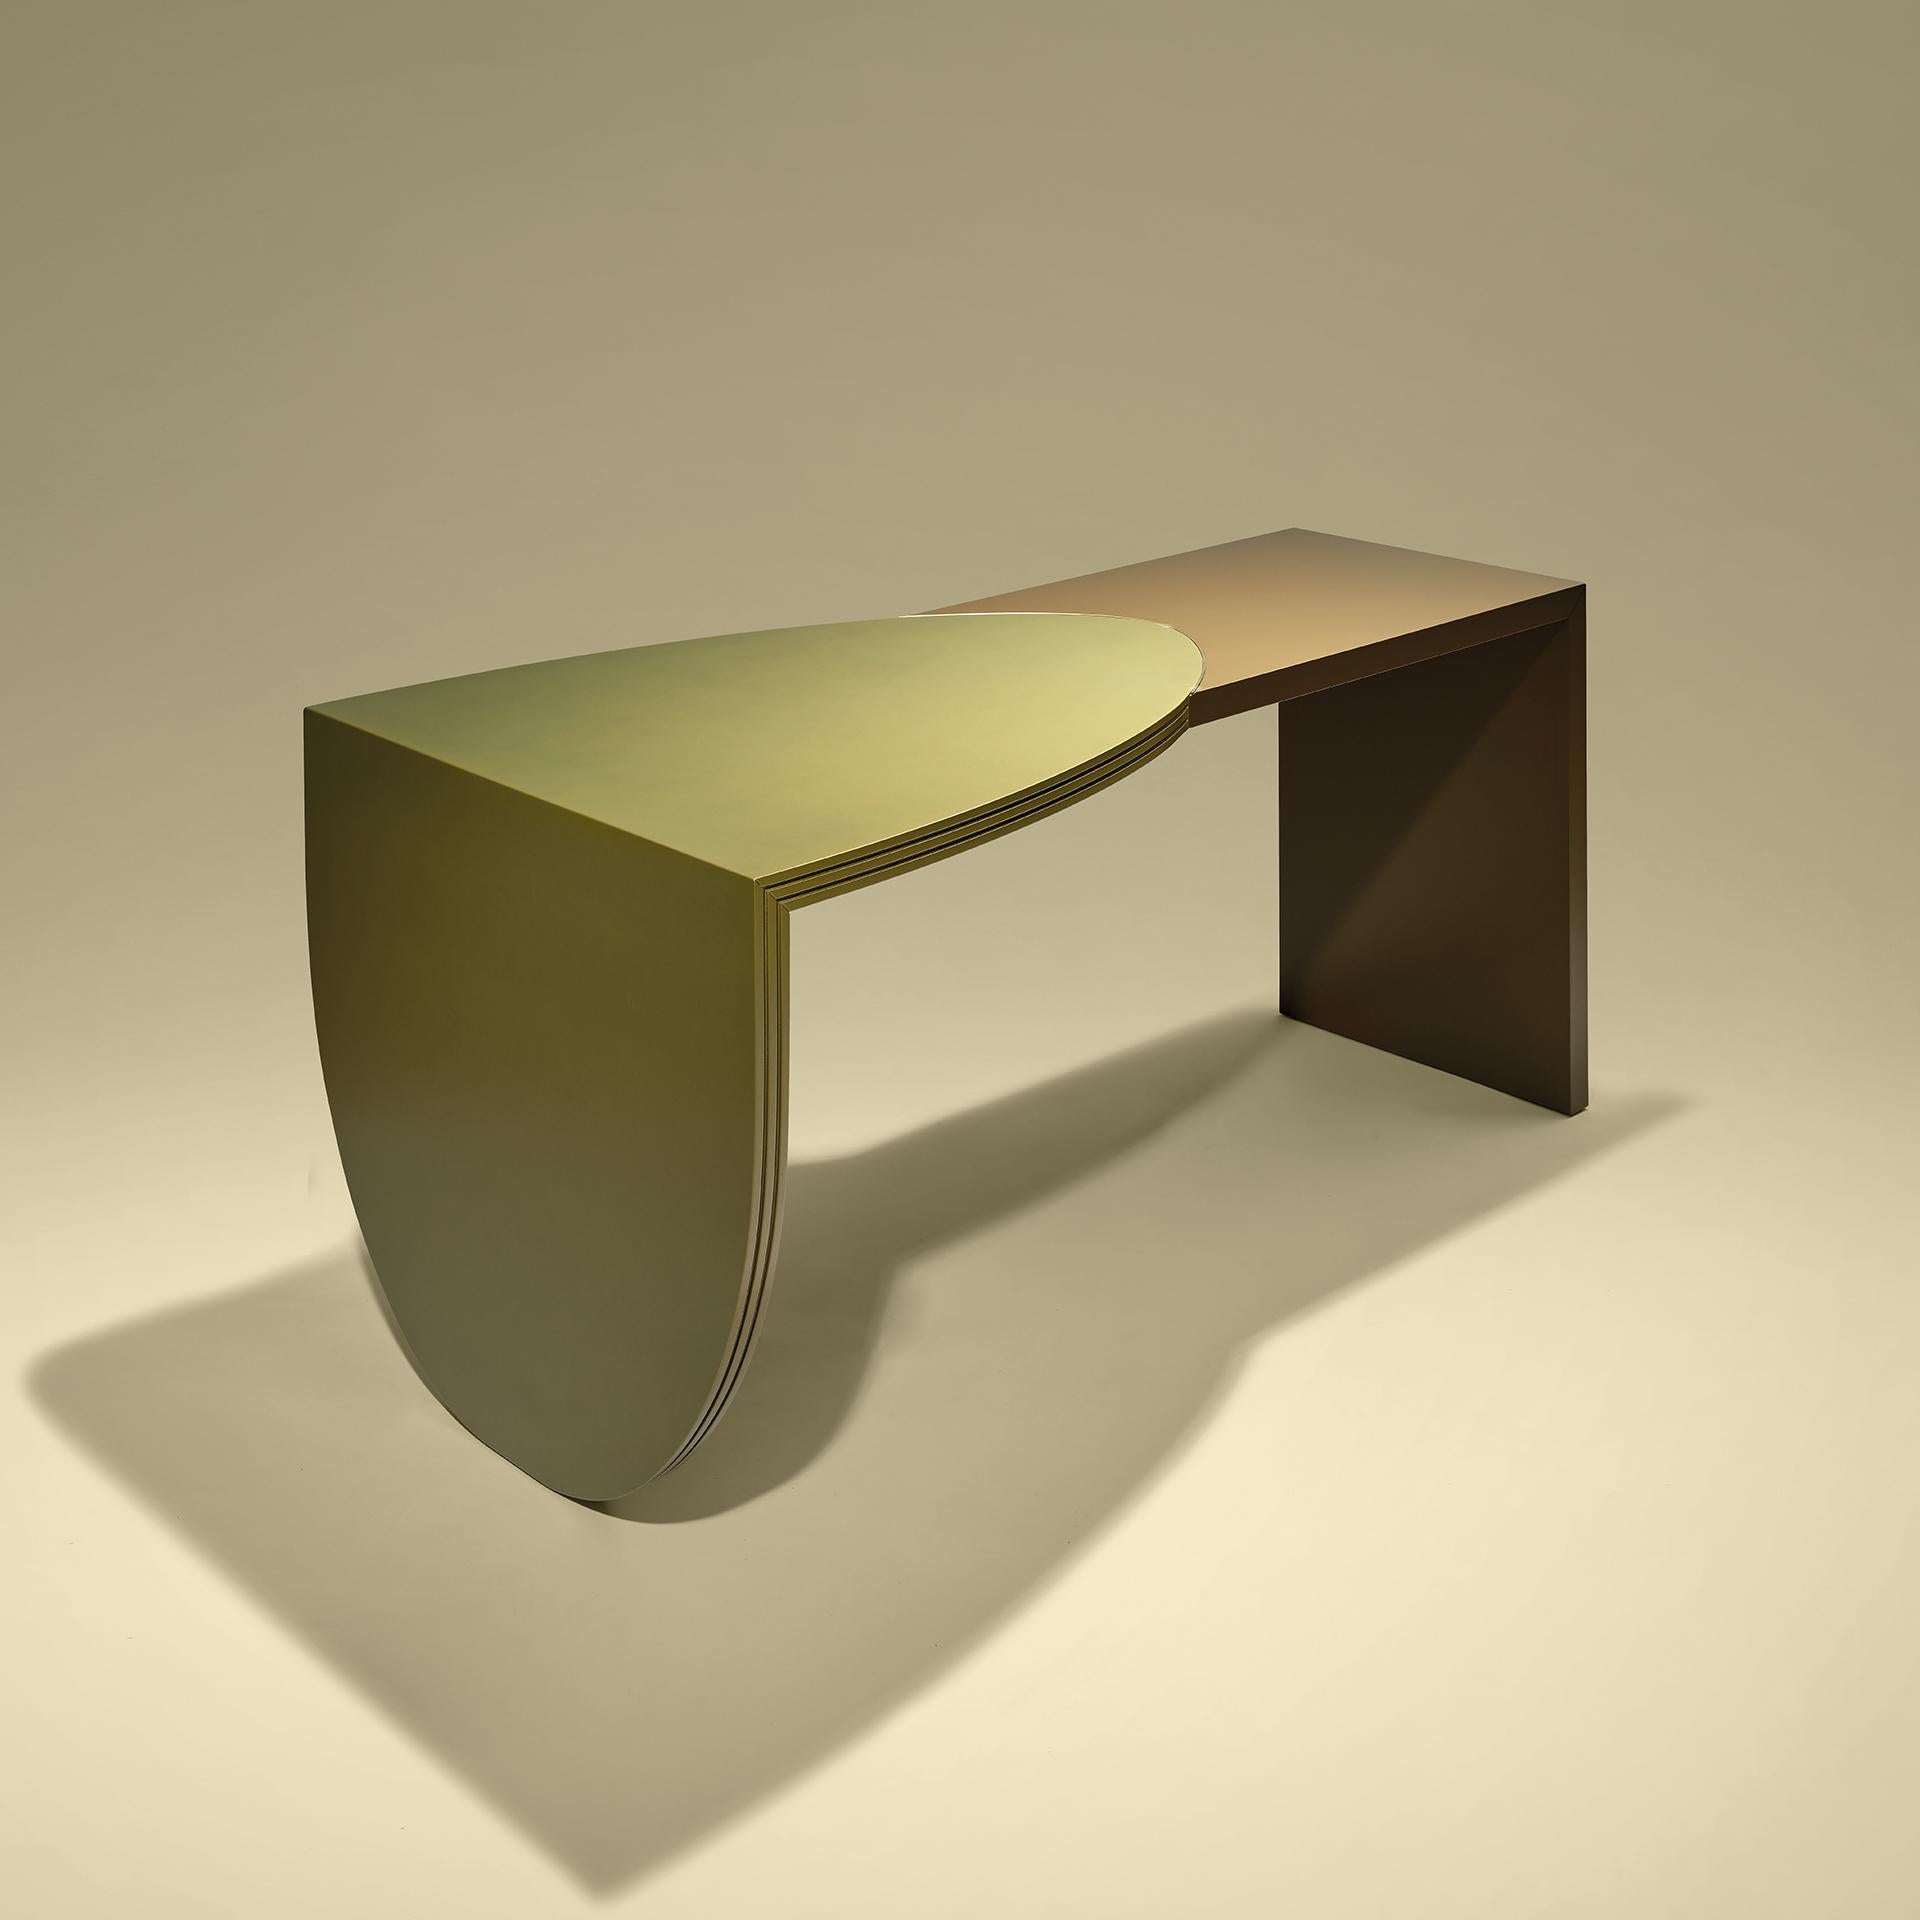 Akoya table desk in green and gold lacquer with bronze trim inlay.

Also possible in these dimensions:
20 x 59 x 28 in.

Bespoke / Customizable
Identical shapes with different sizes and finishings.
All RAL colors available. (Mate / Half Gloss /